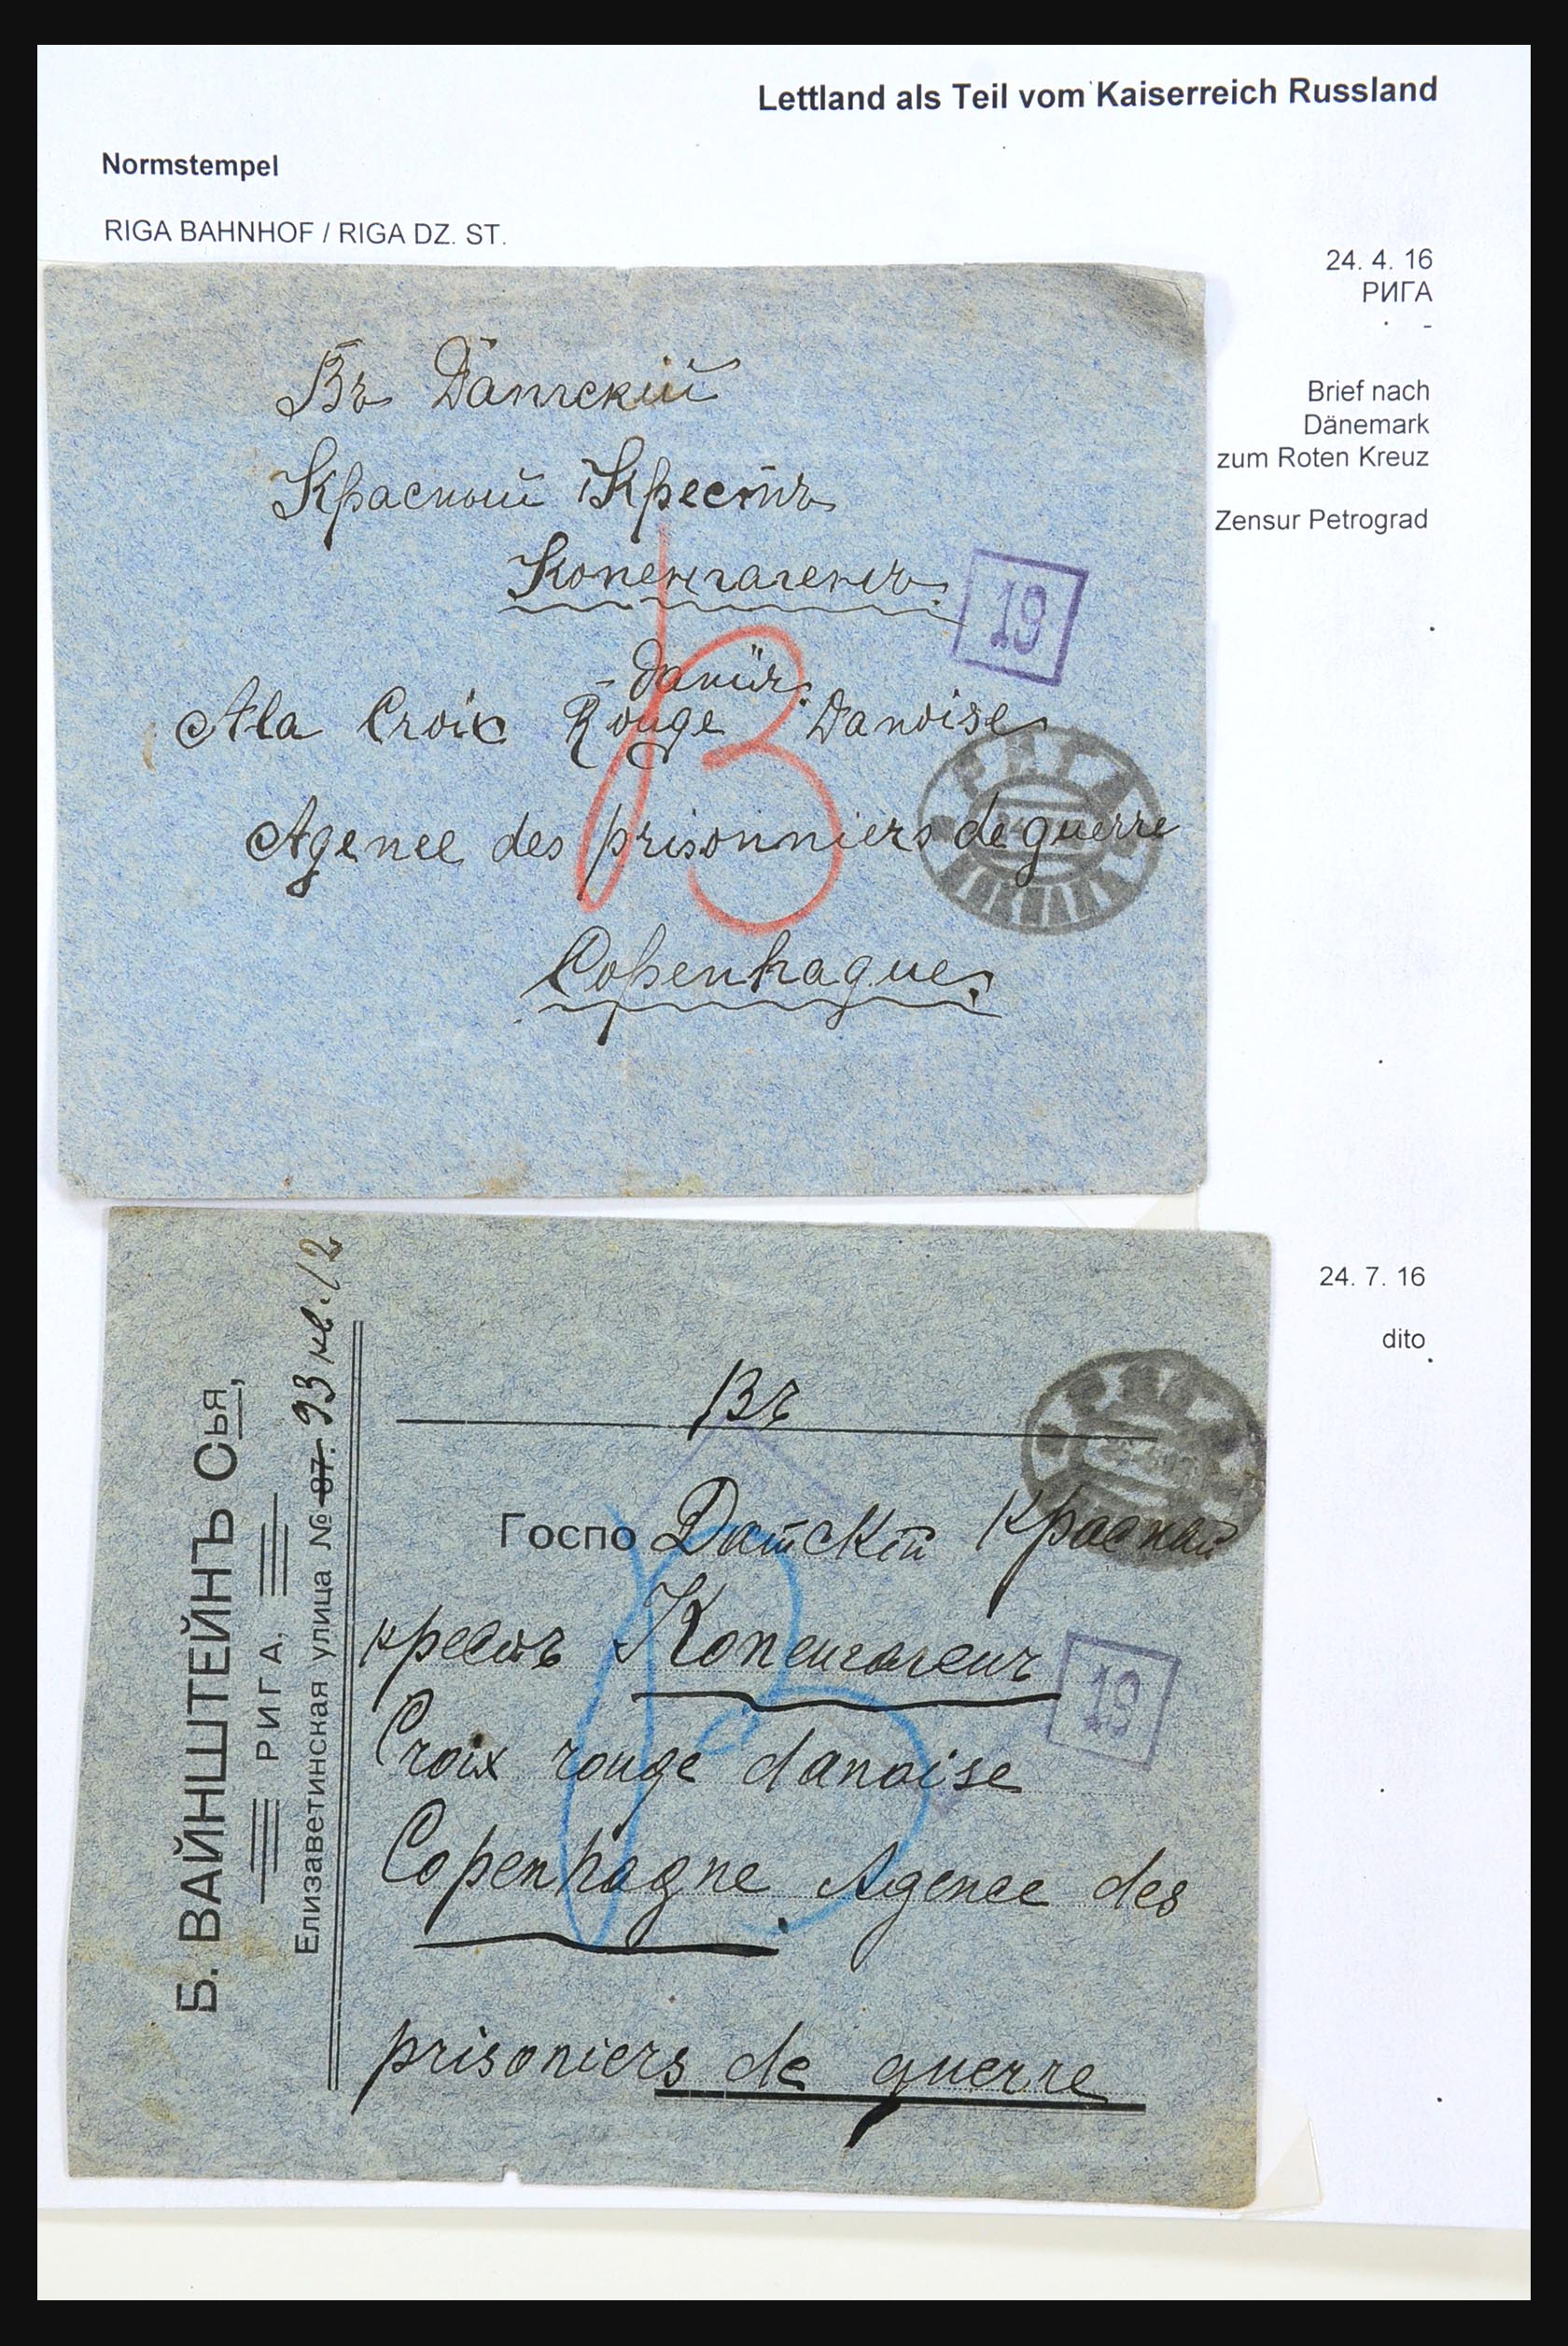 31305 150 - 31305 Latvia as part of Russia 1817-1918.